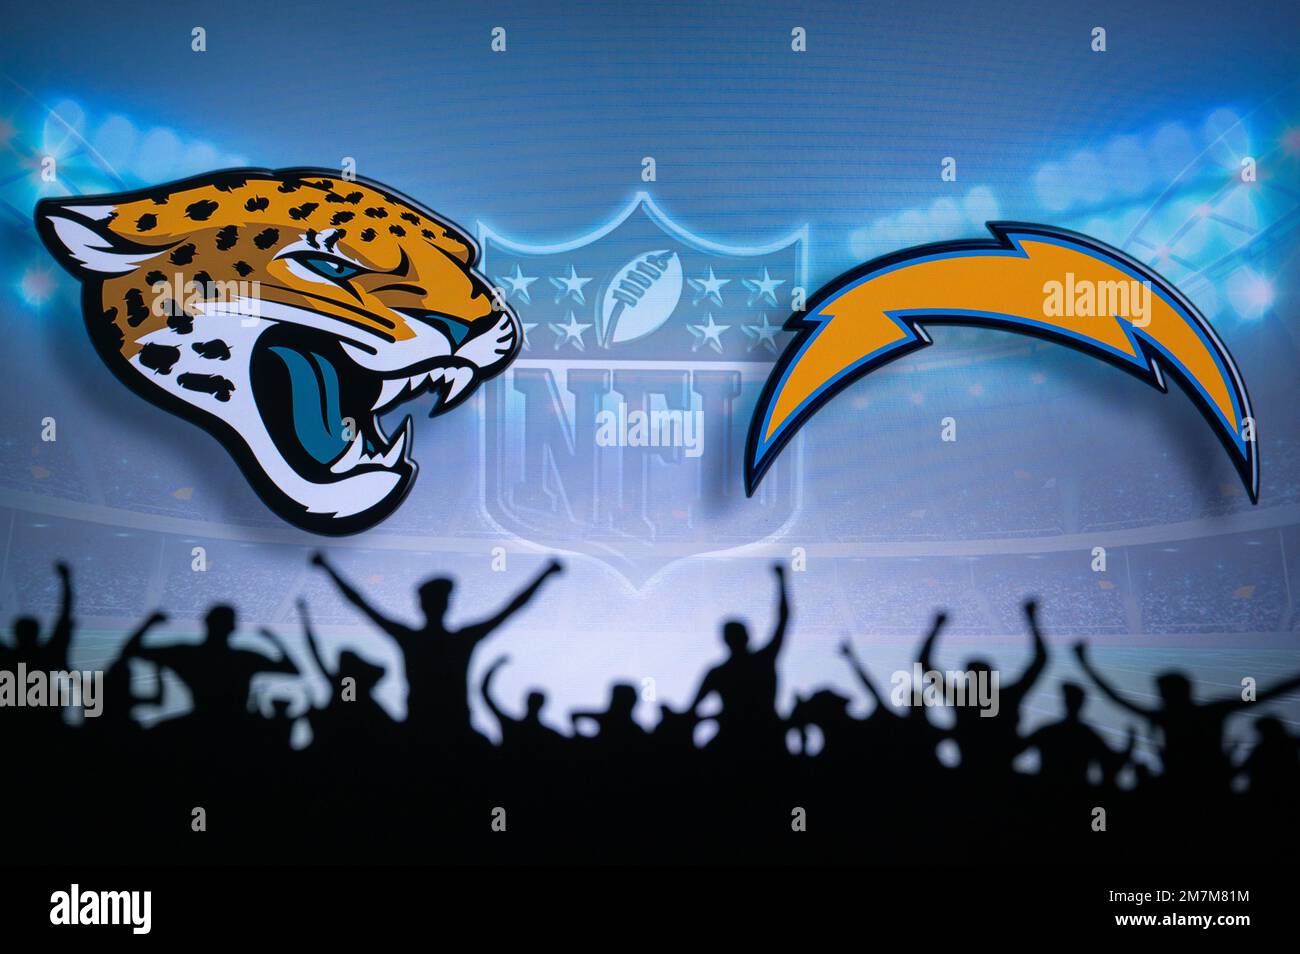 Jacksonville Jaguars vs. Los Angeles Chargers Wild Card Preview